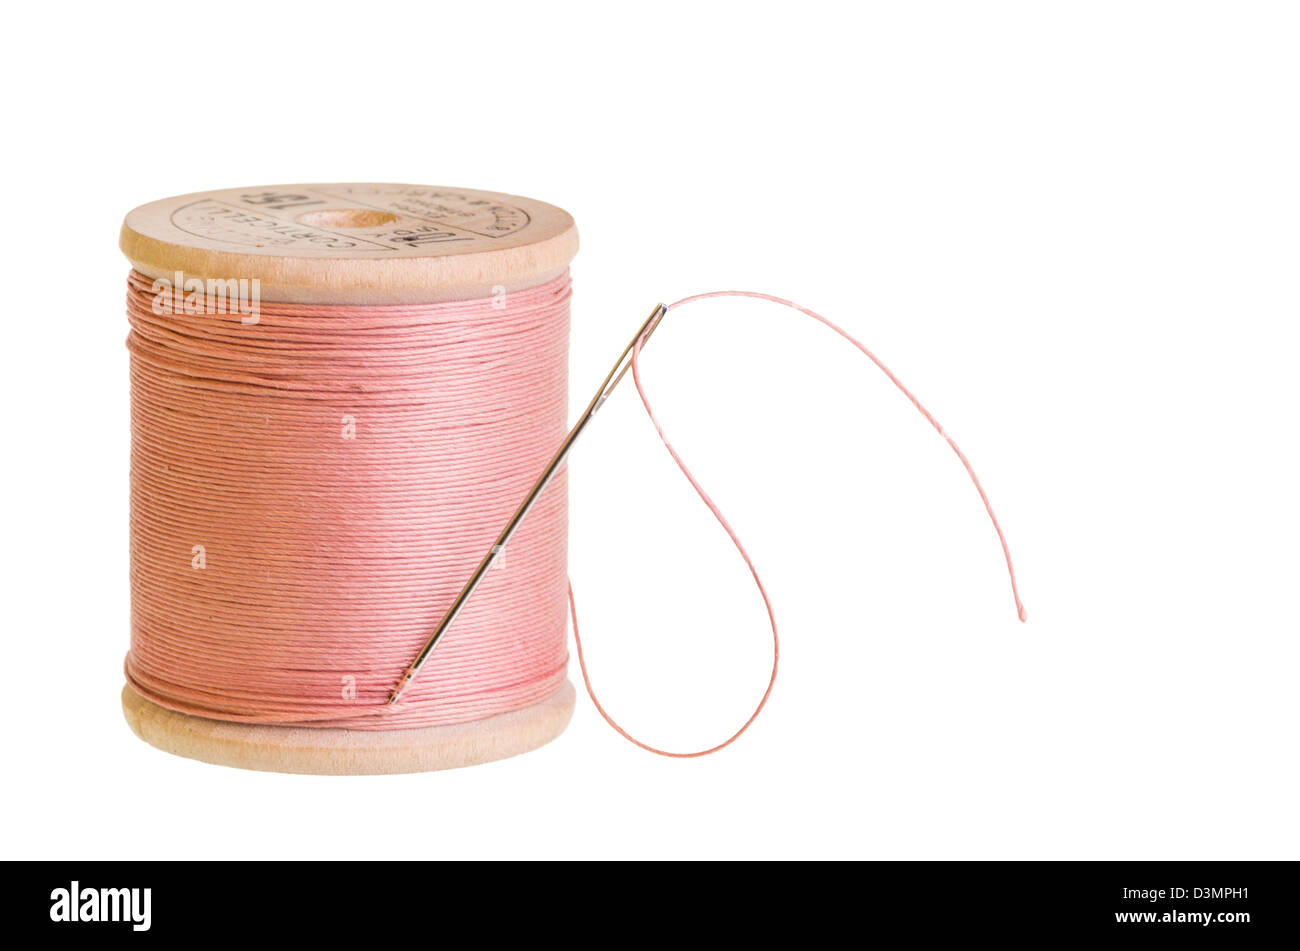 Two Spools of Pink Thread with Needle Stock Photo - Image of point